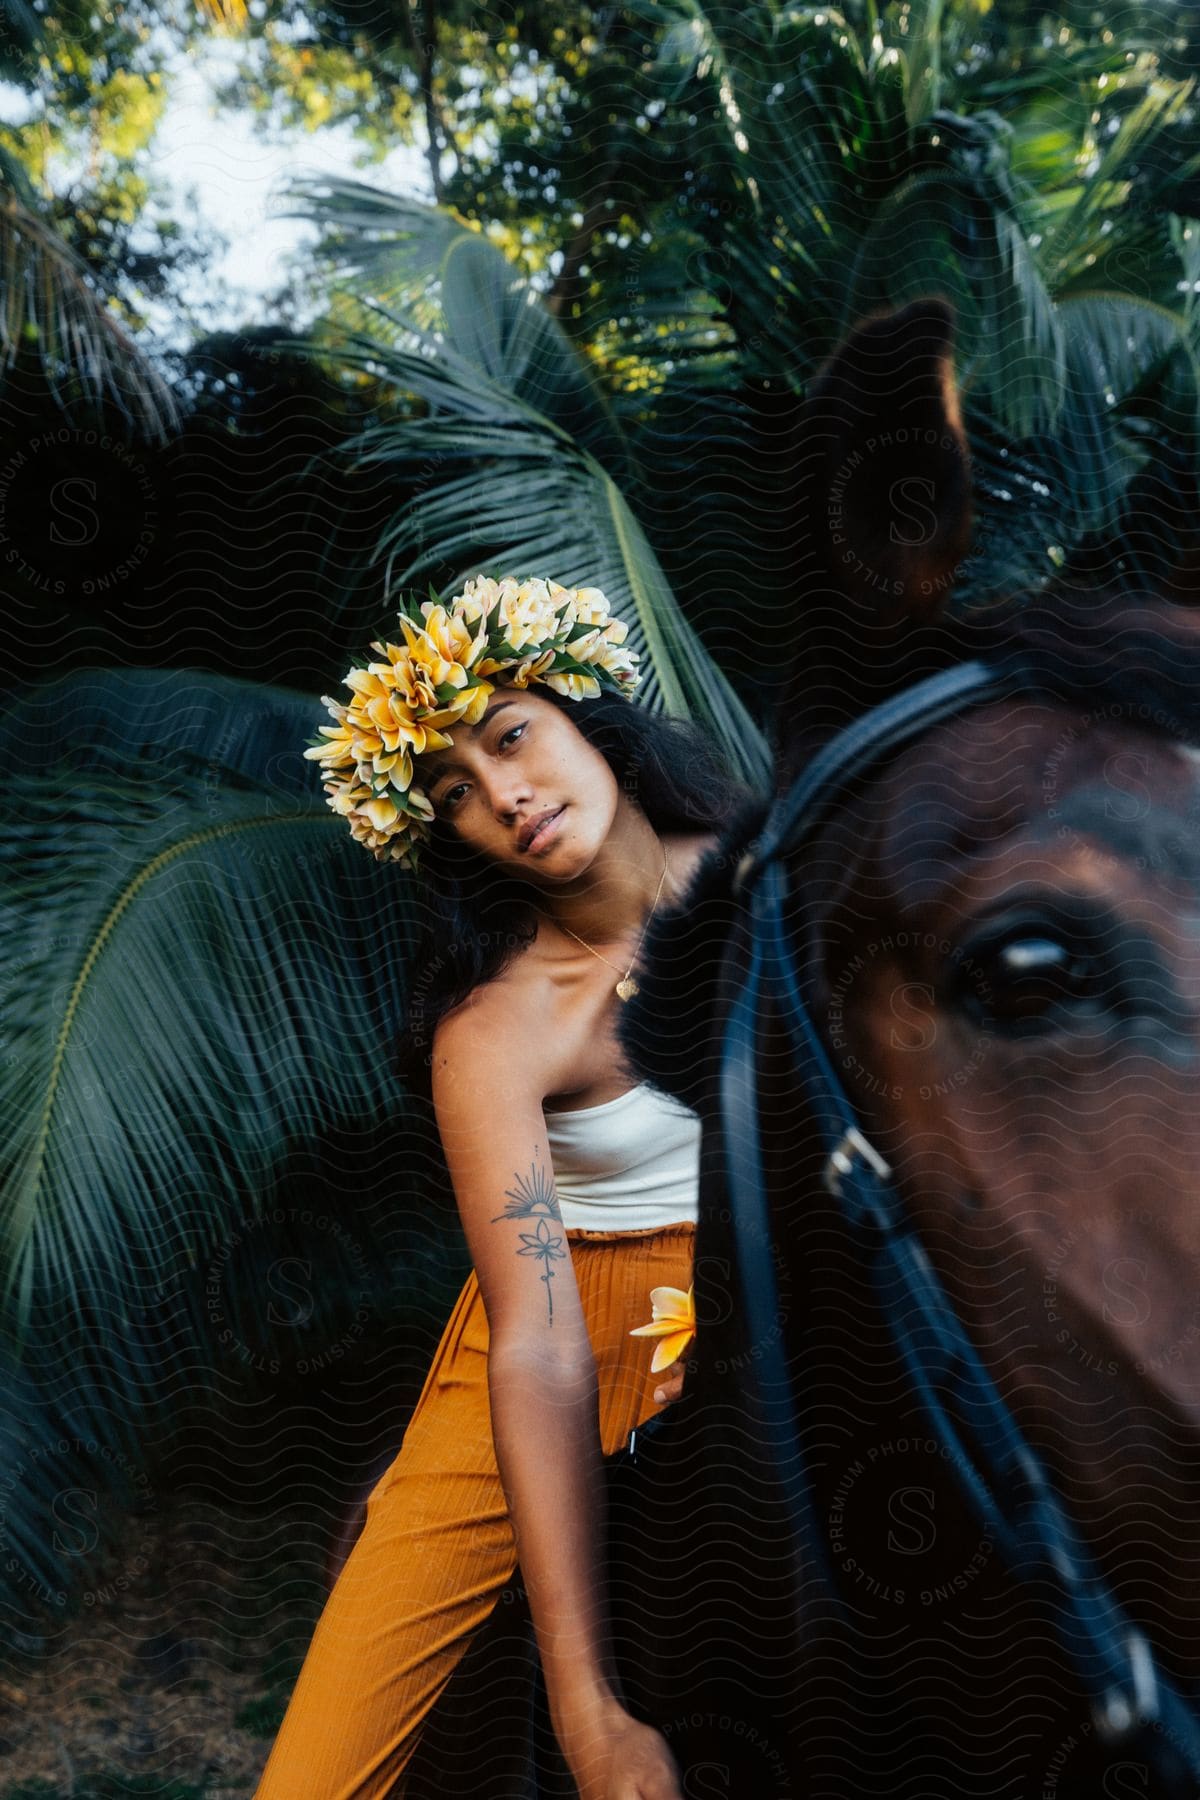 Stock photo of a woman riding a horse in a lush jungle